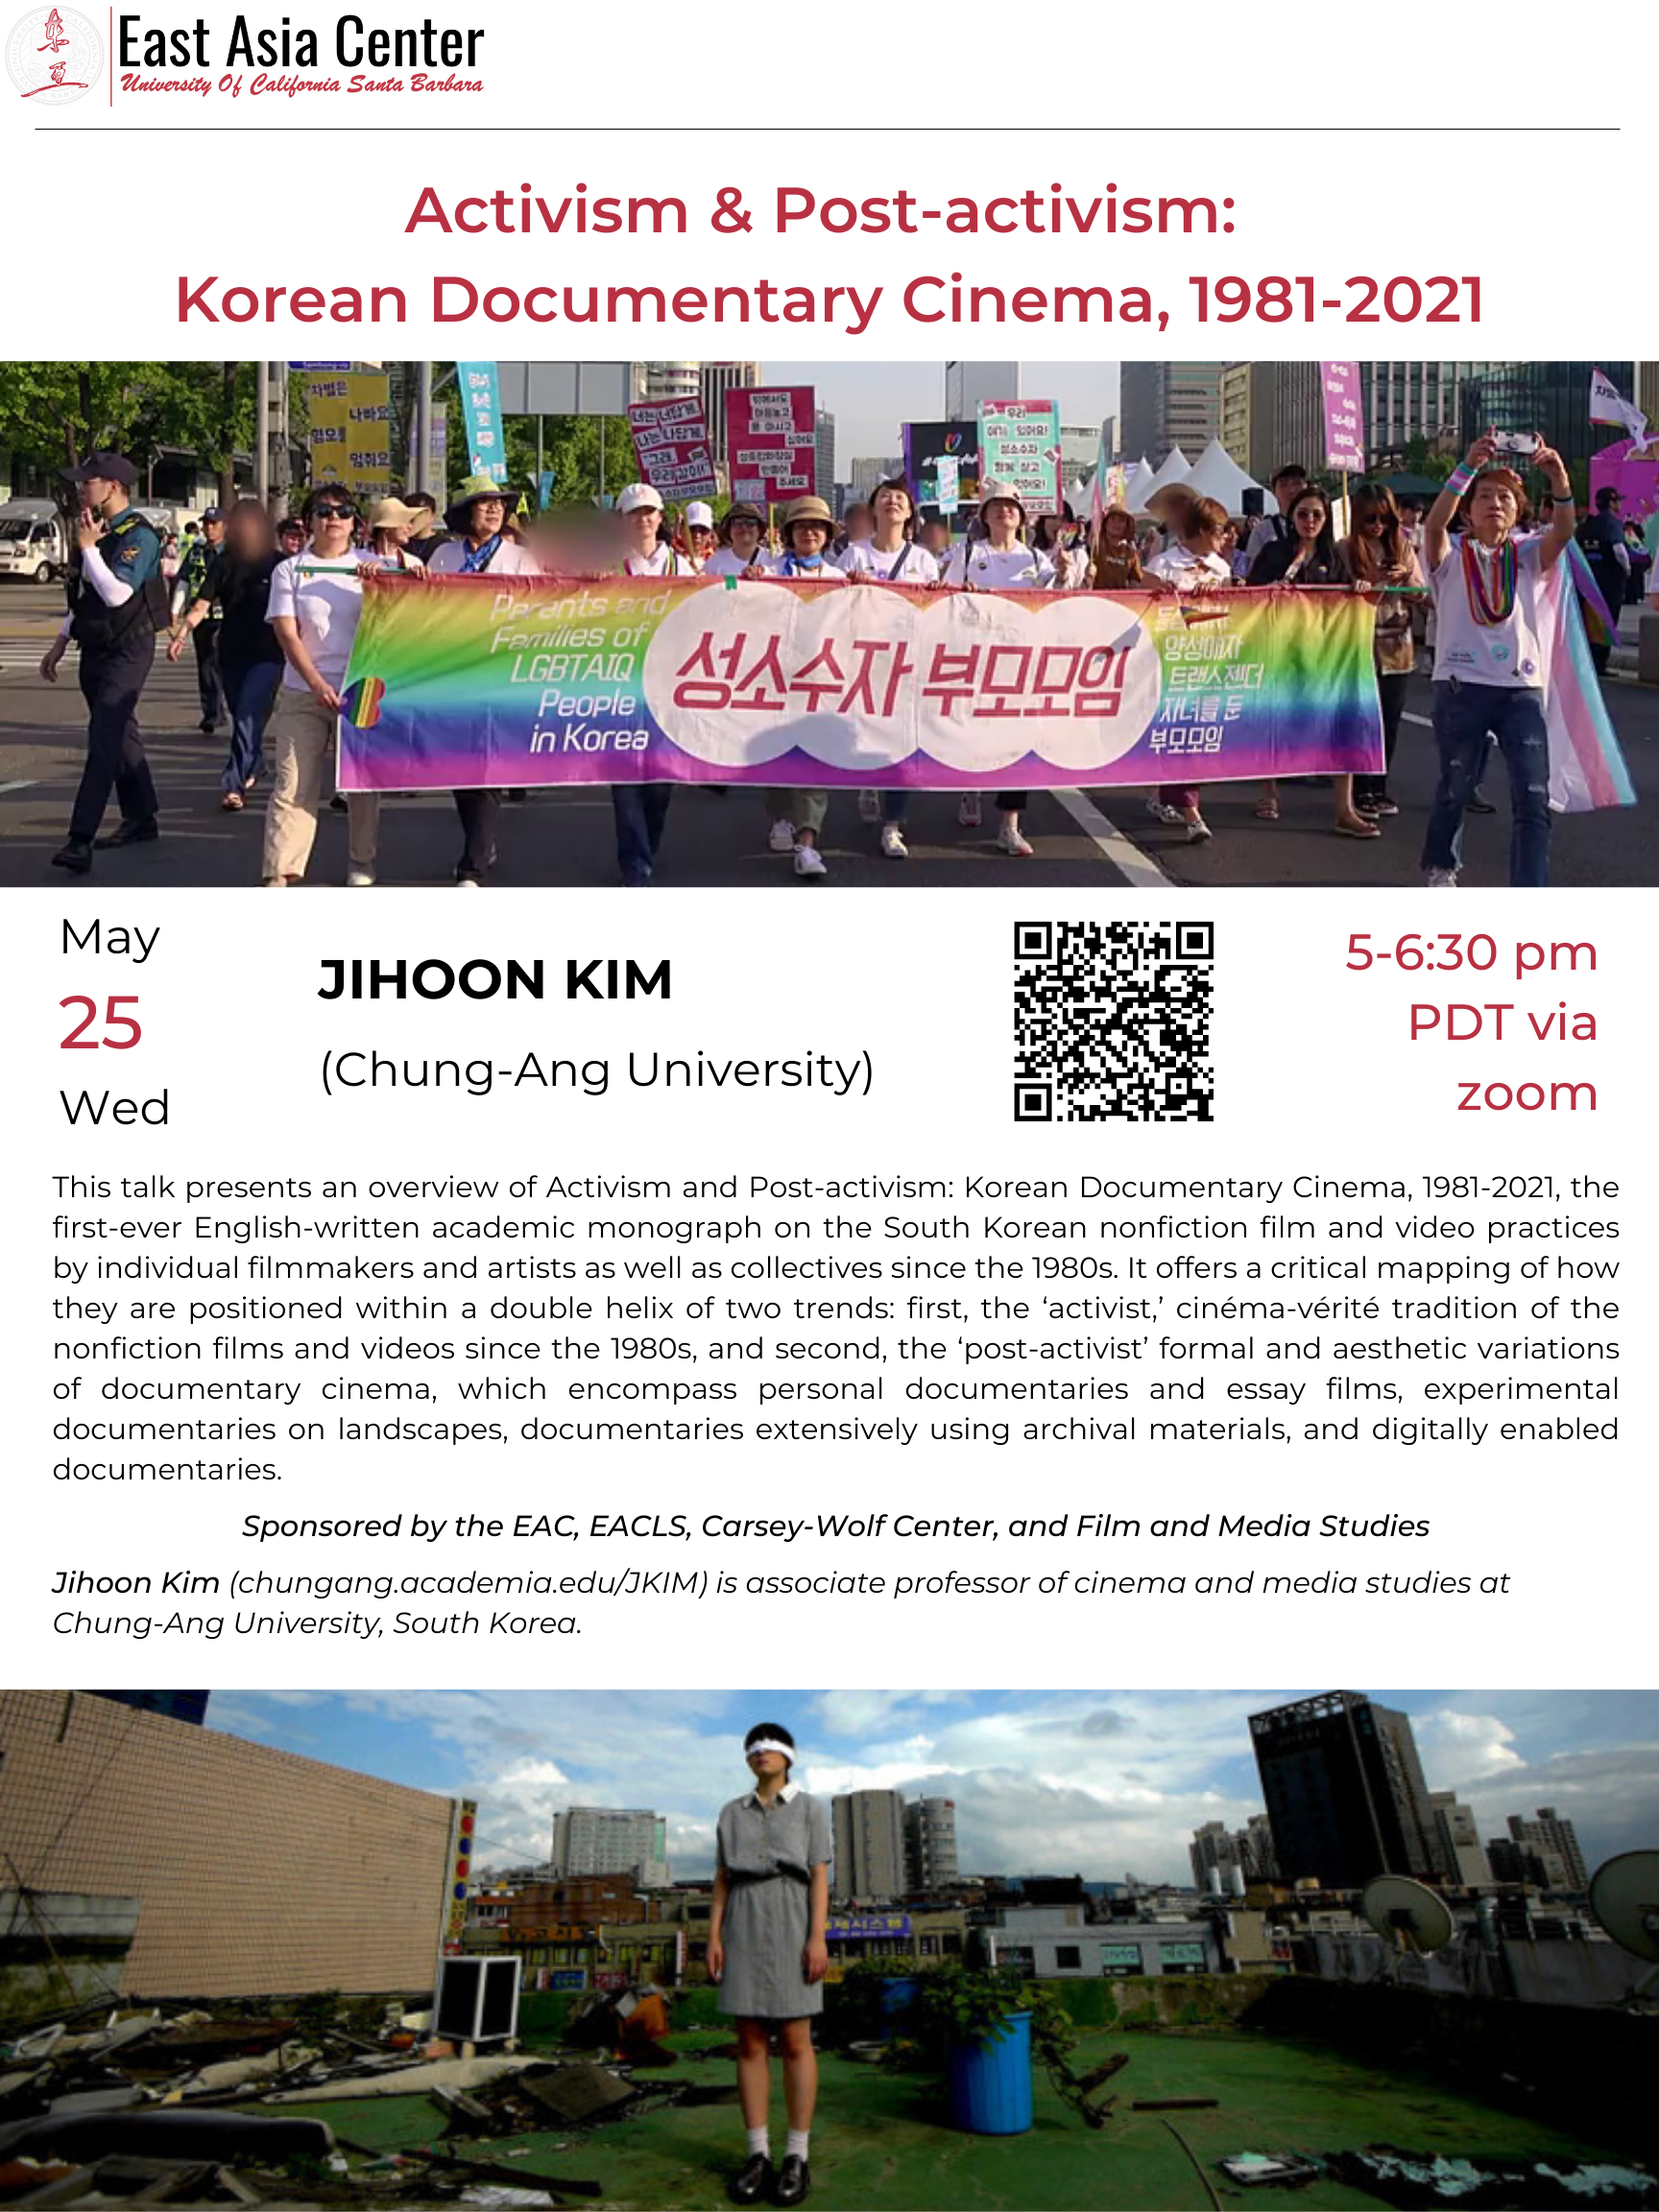 Flyer for "Activism & Post-activism: Korean Documentary Cinema, 1981-2021" by Jihoon Kim on 5/25/22 from 5-6:30 on Zoom